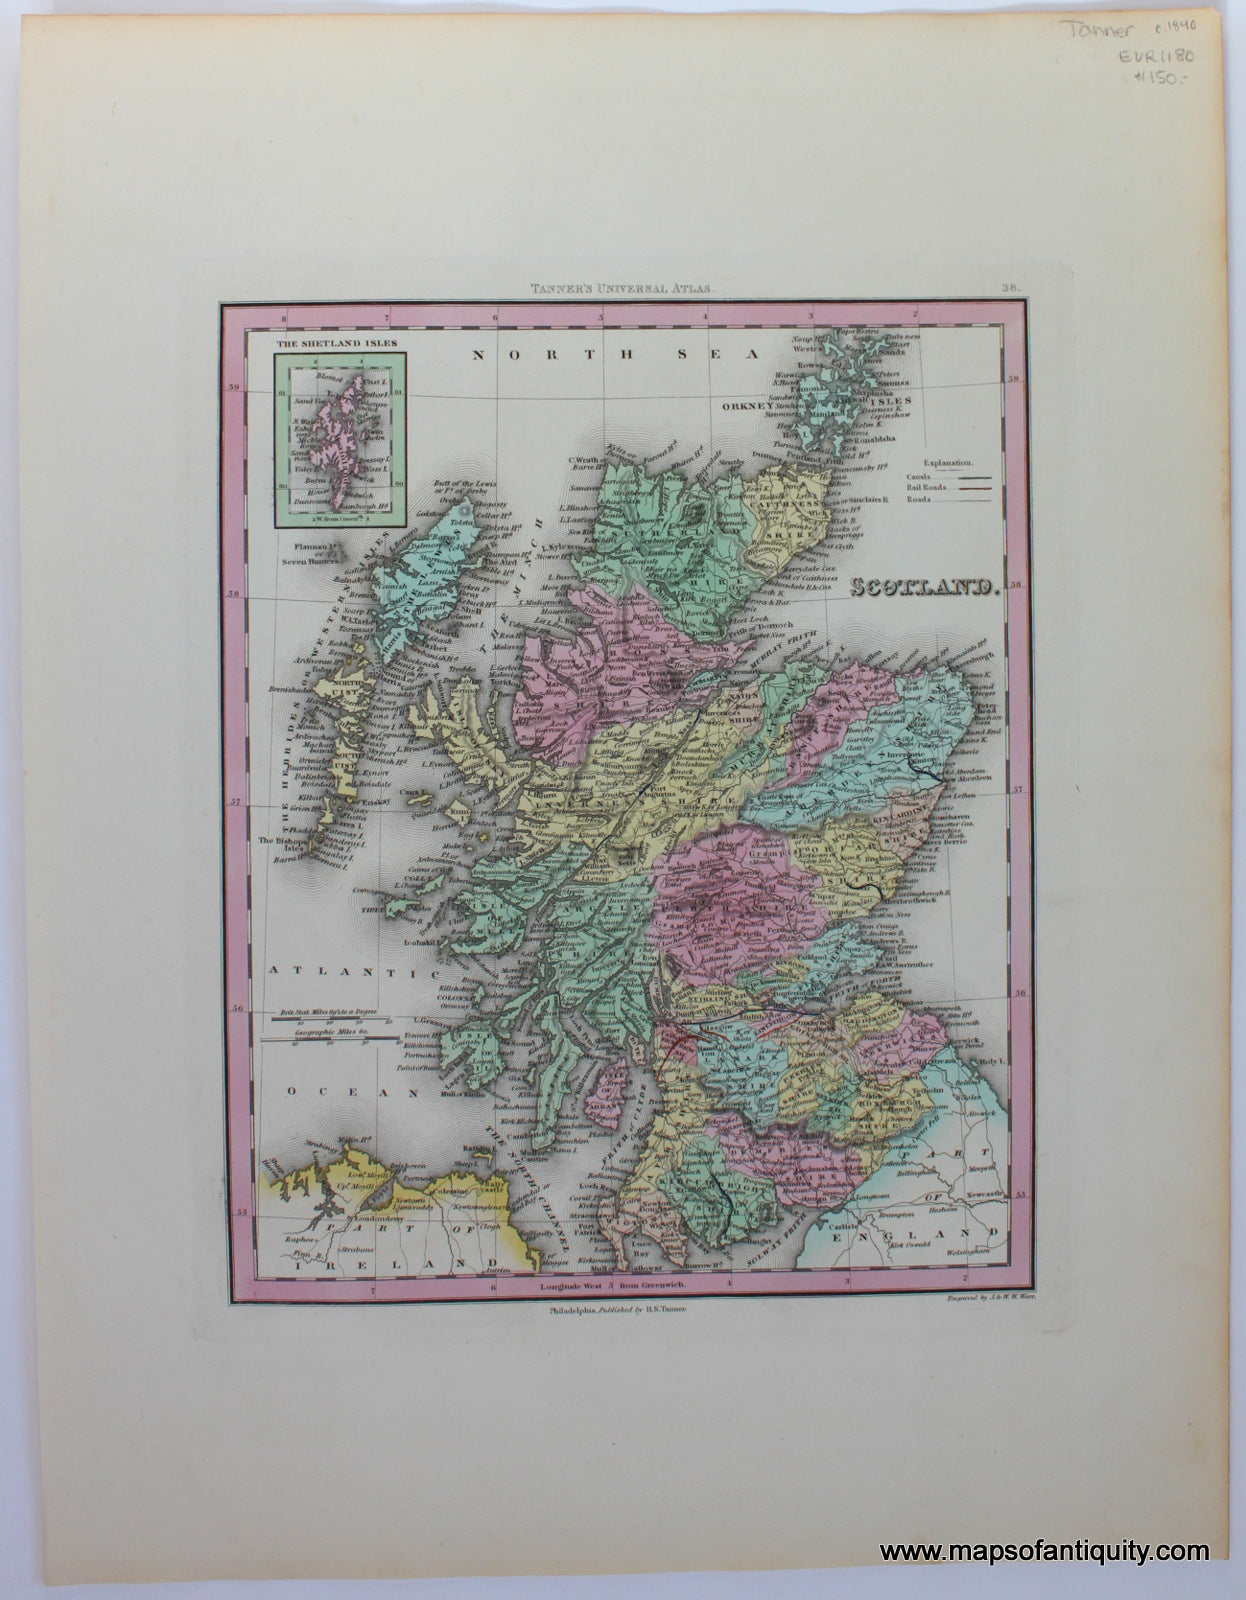 Antique-Map-Scotland.-Tanner-1840-1840s-1800s-19th-century-maps-of-antiquity